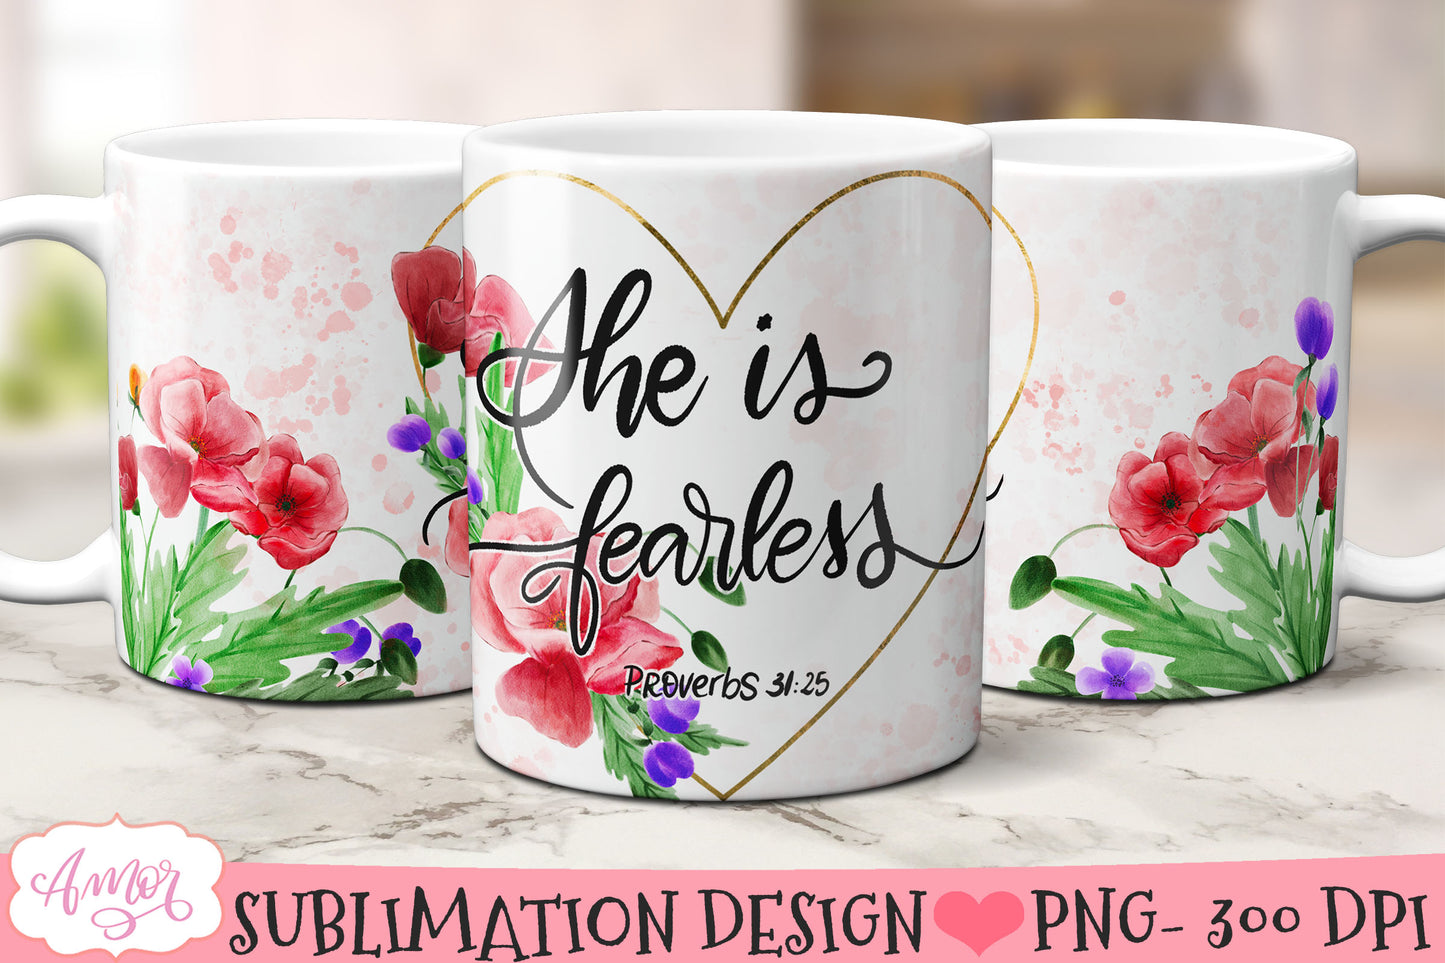 Bundle of 6 Bible Verse Mug Wraps with Hand-Painted Florals